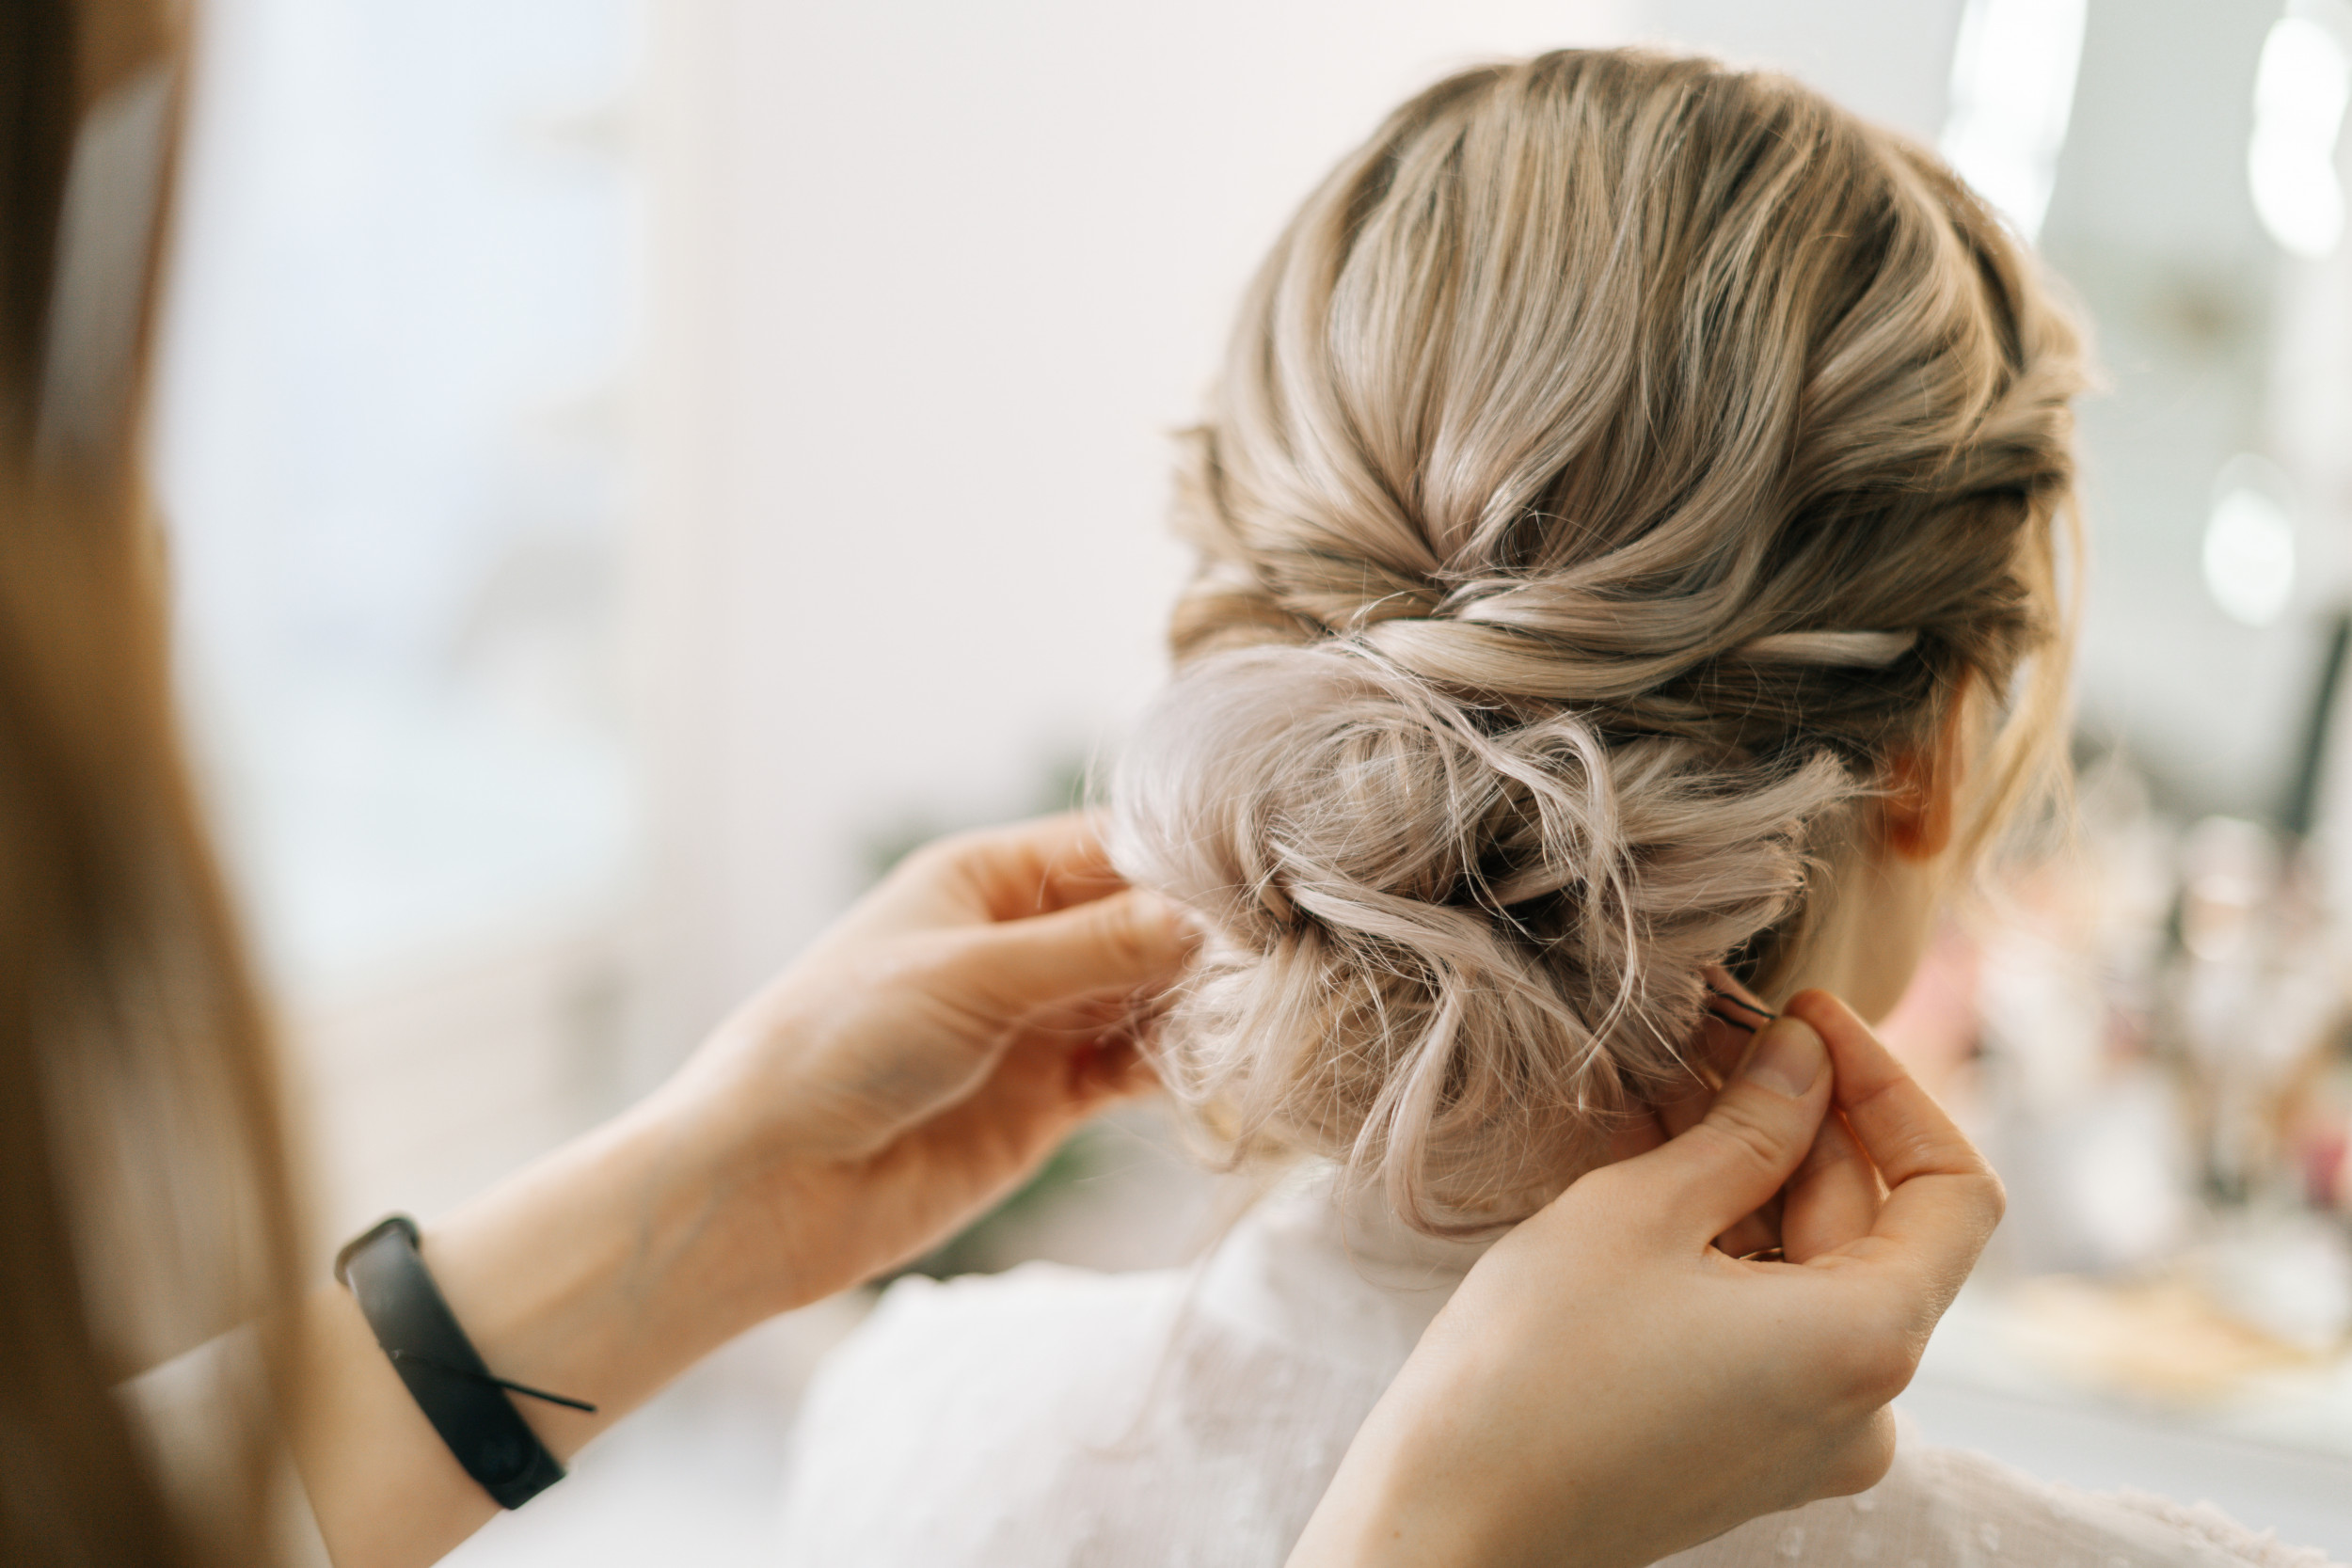 Bridal Hair Trial Goes Wrong in Viral Video Viewed More Than 2 Million Times